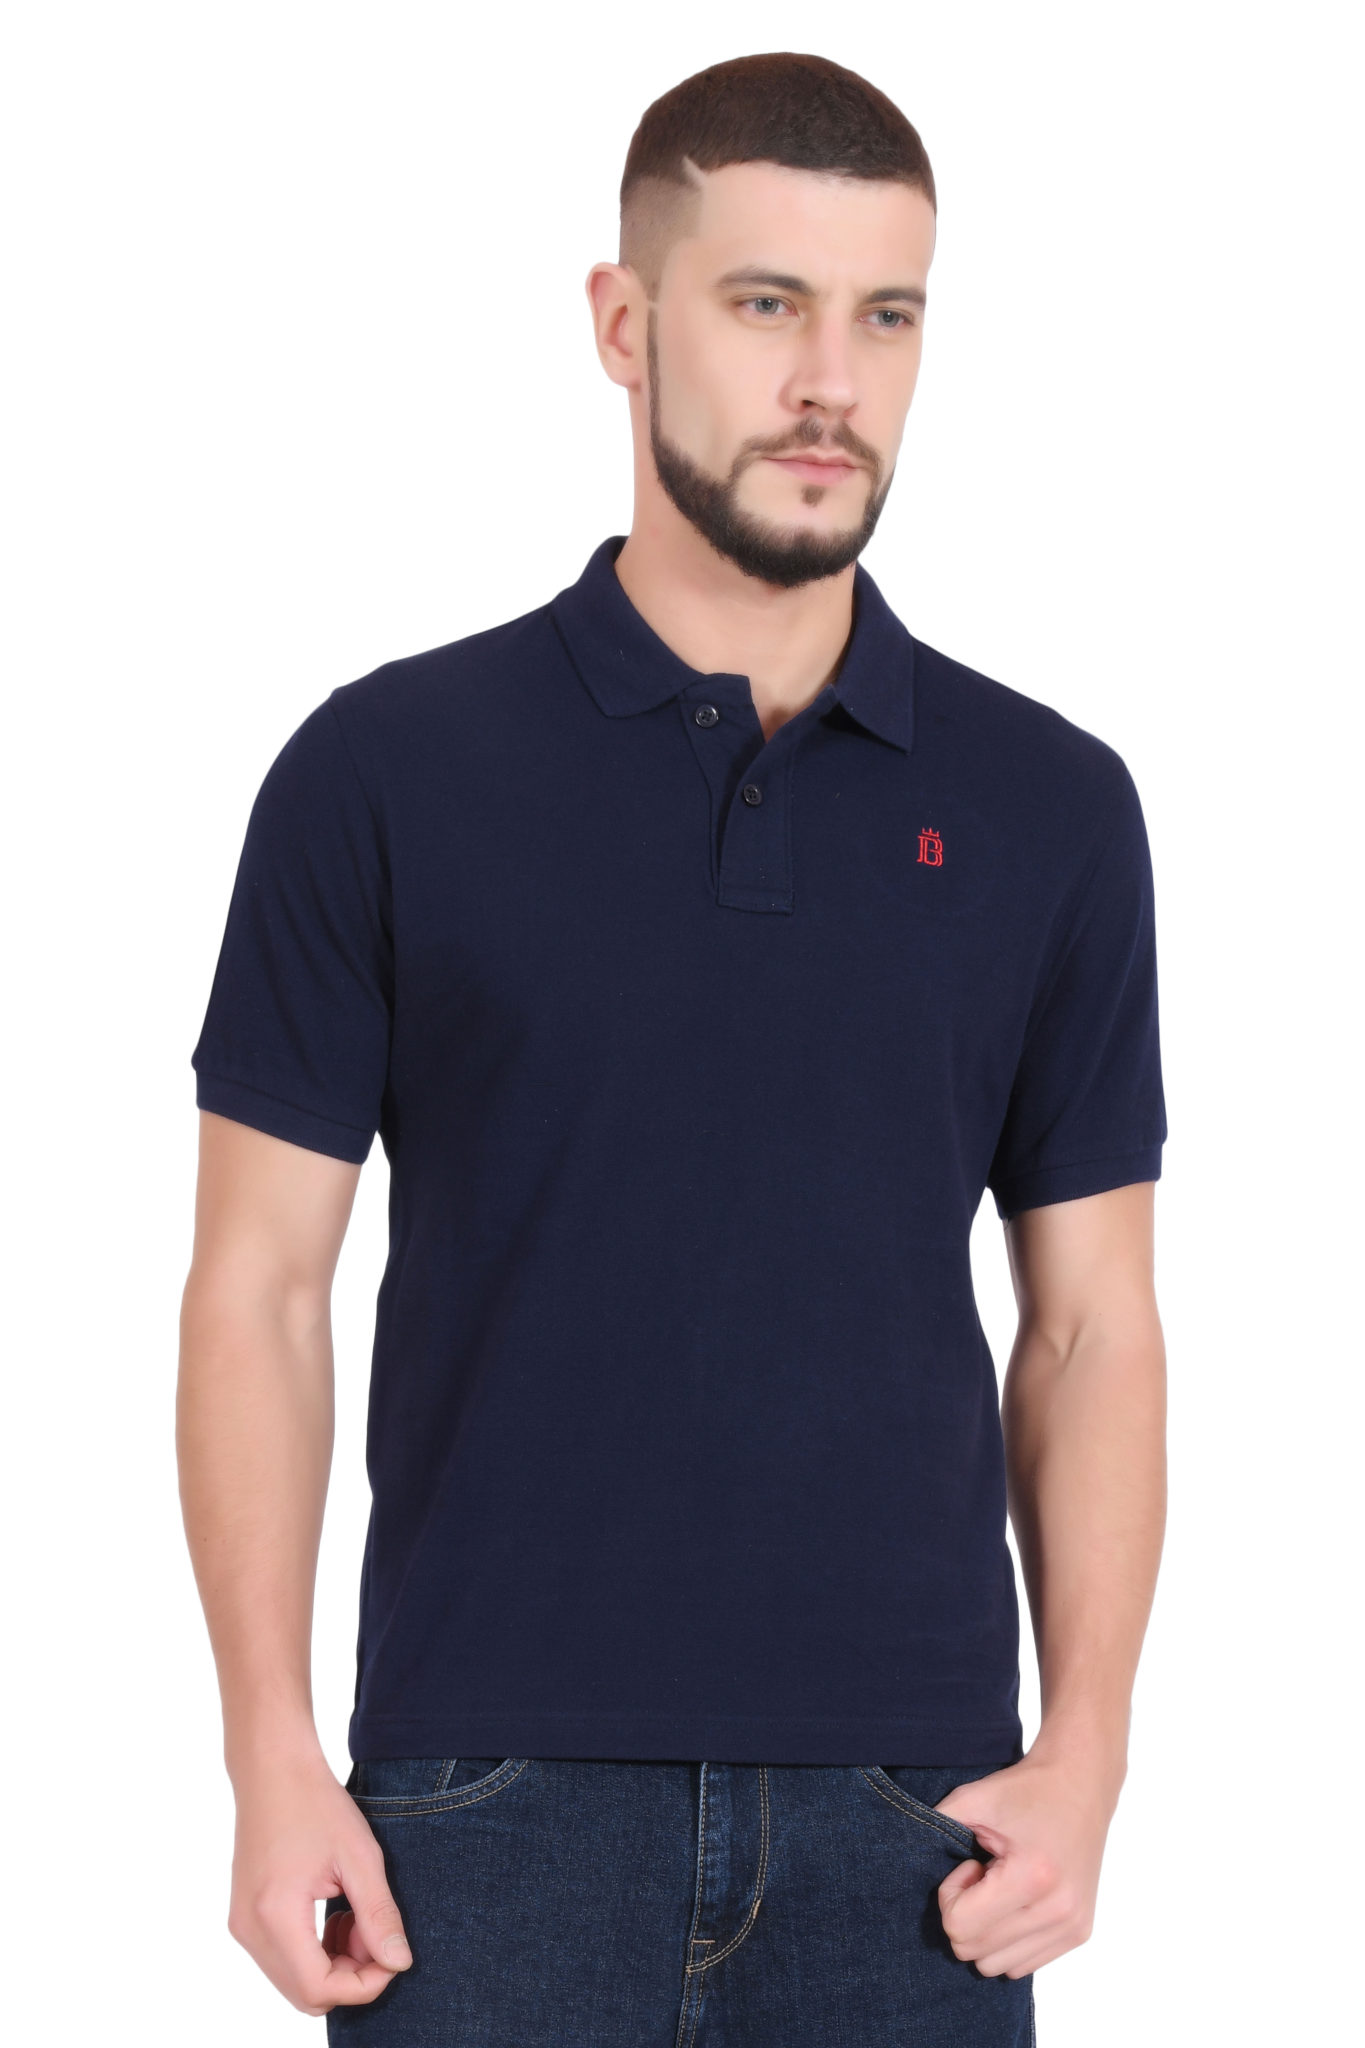 Cotton Polo T Shirt For Men. Plain Solid Design With Collar Navy Blue Front Right 